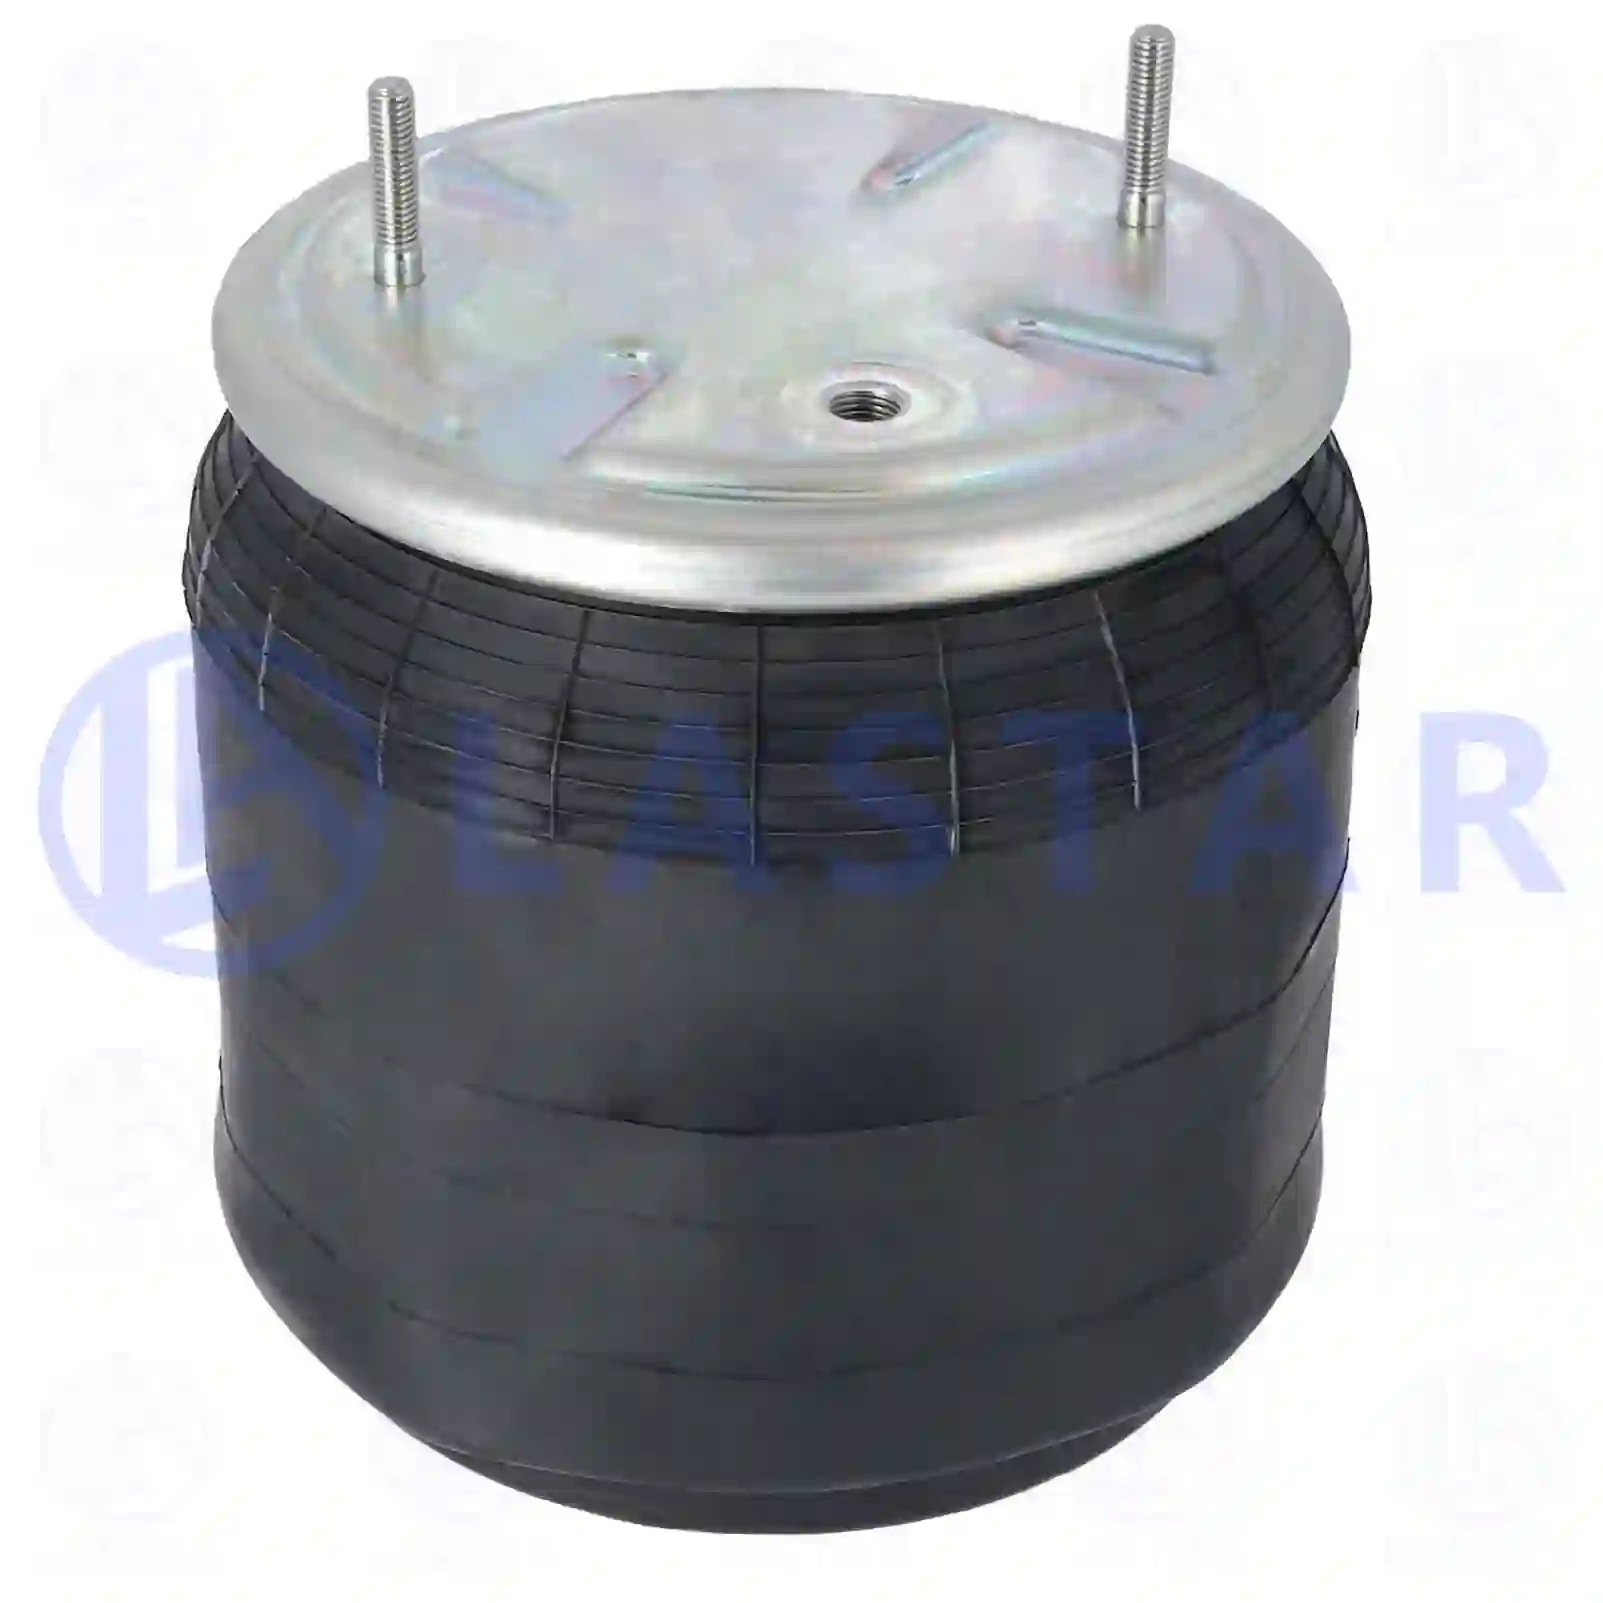 Air spring, with steel piston, 77727612, 21119077, 21161555, 21961478, , , ||  77727612 Lastar Spare Part | Truck Spare Parts, Auotomotive Spare Parts Air spring, with steel piston, 77727612, 21119077, 21161555, 21961478, , , ||  77727612 Lastar Spare Part | Truck Spare Parts, Auotomotive Spare Parts